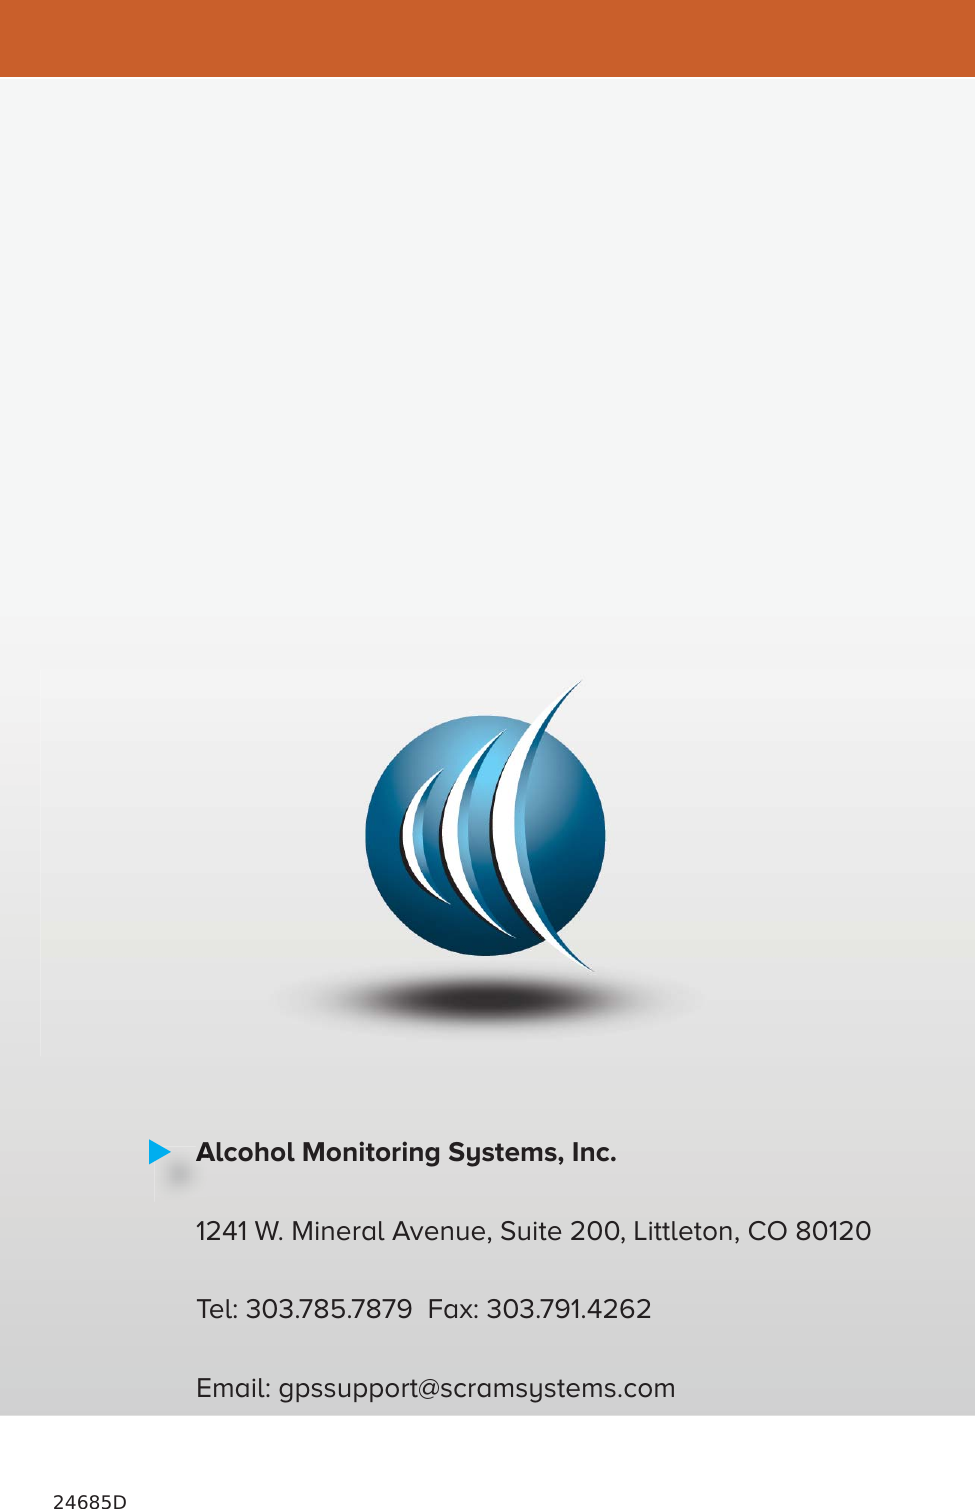 24685DAlcohol Monitoring Systems, Inc.1241 W. Mineral Avenue, Suite 200, Littleton, CO 80120Tel: 303.785.7879  Fax: 303.791.4262Email: gpssupport@scramsystems.comA